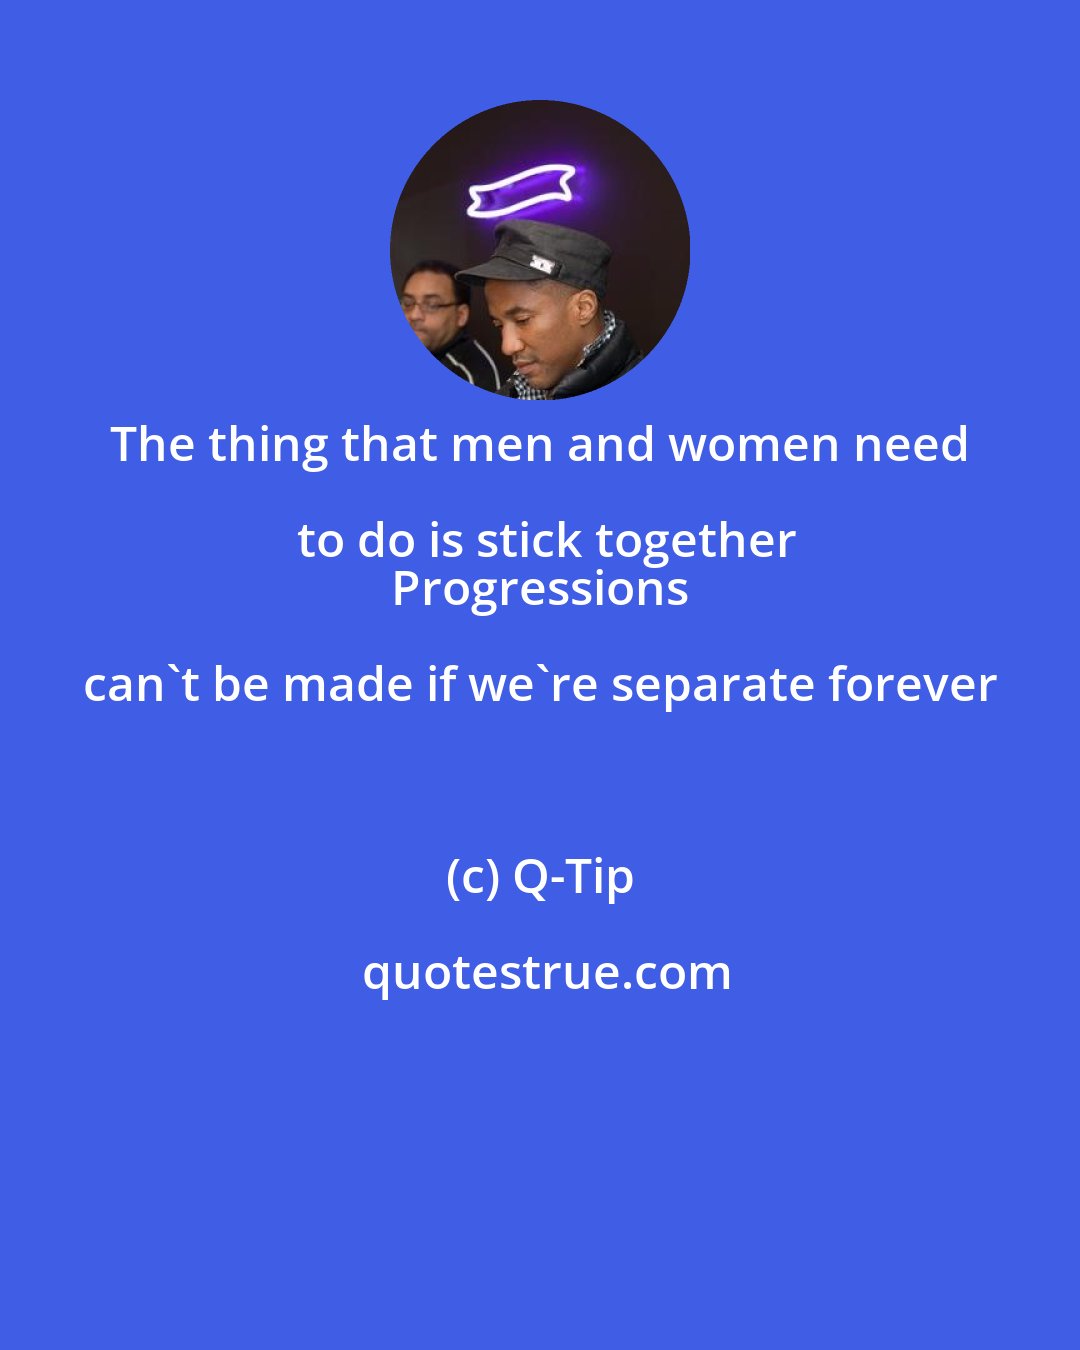 Q-Tip: The thing that men and women need to do is stick together
 Progressions can't be made if we're separate forever